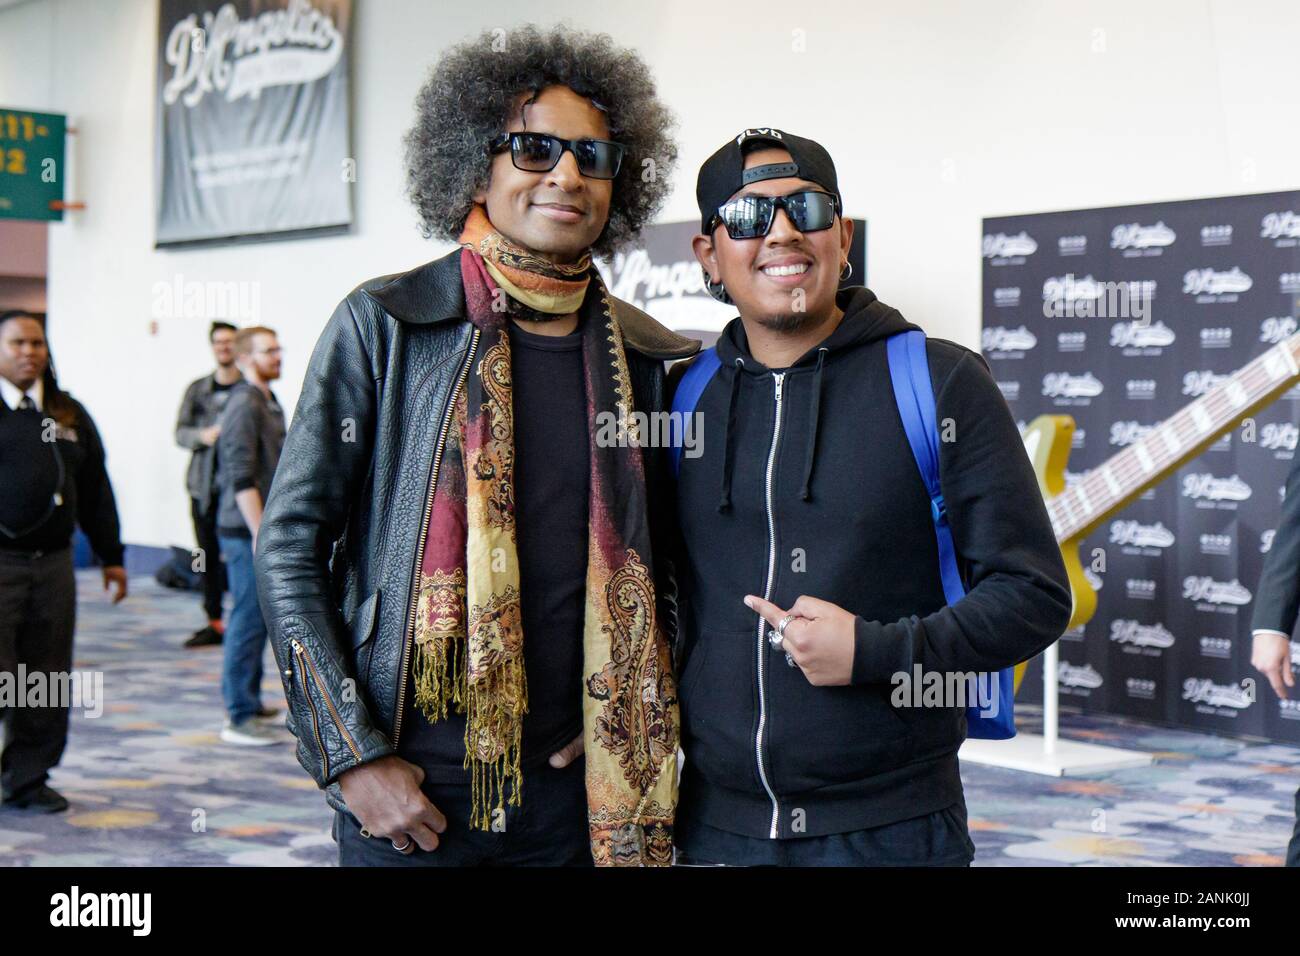 January 16, 2020: William Duvall  front man for Alice in Chains  meeting fans at the 2020  NAMM Show at Anaheim Convention Center on January 17, 2020  in Anaheim, California. (Credit Image: © Marissa Carter/ZUMA Wire) Stock Photo